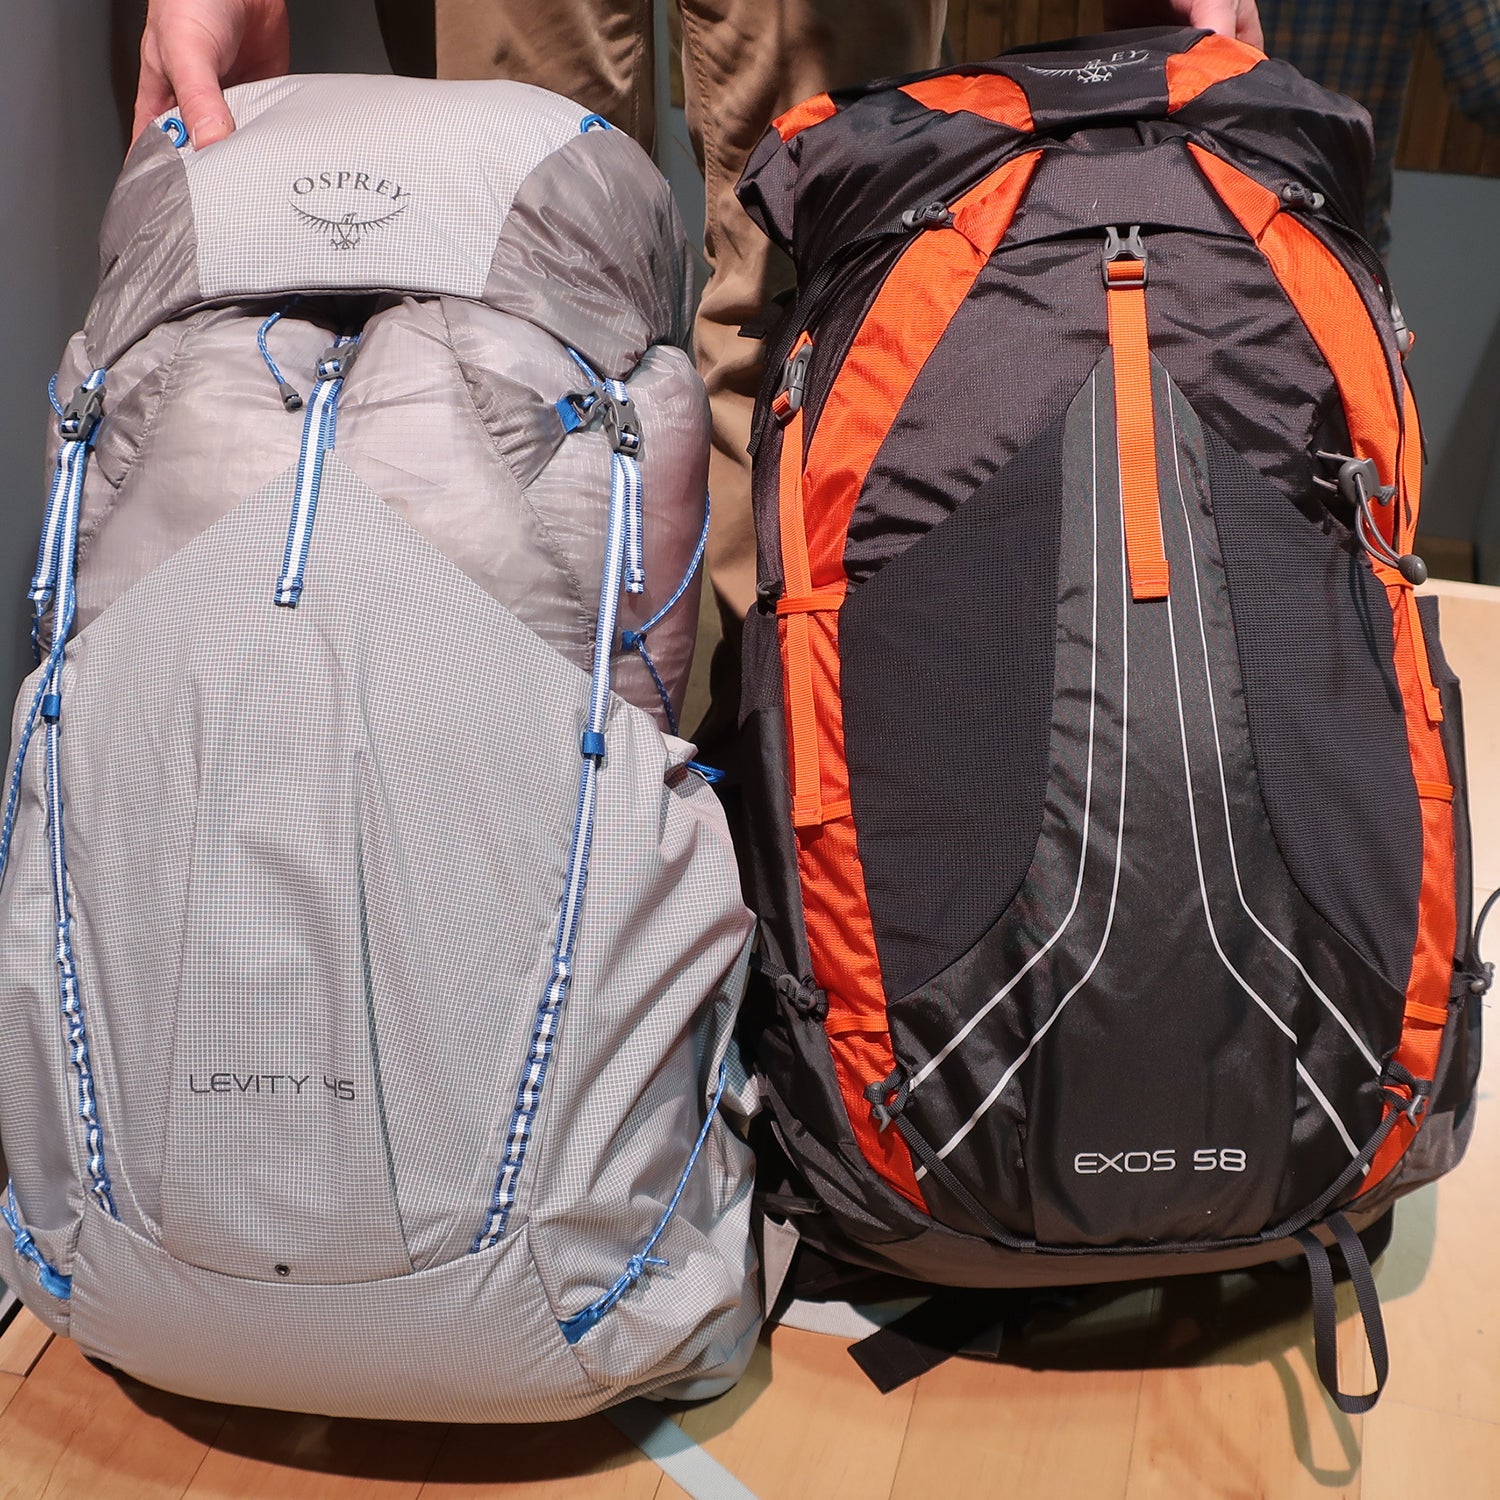 Previewing the Osprey Levity Pack - Outside